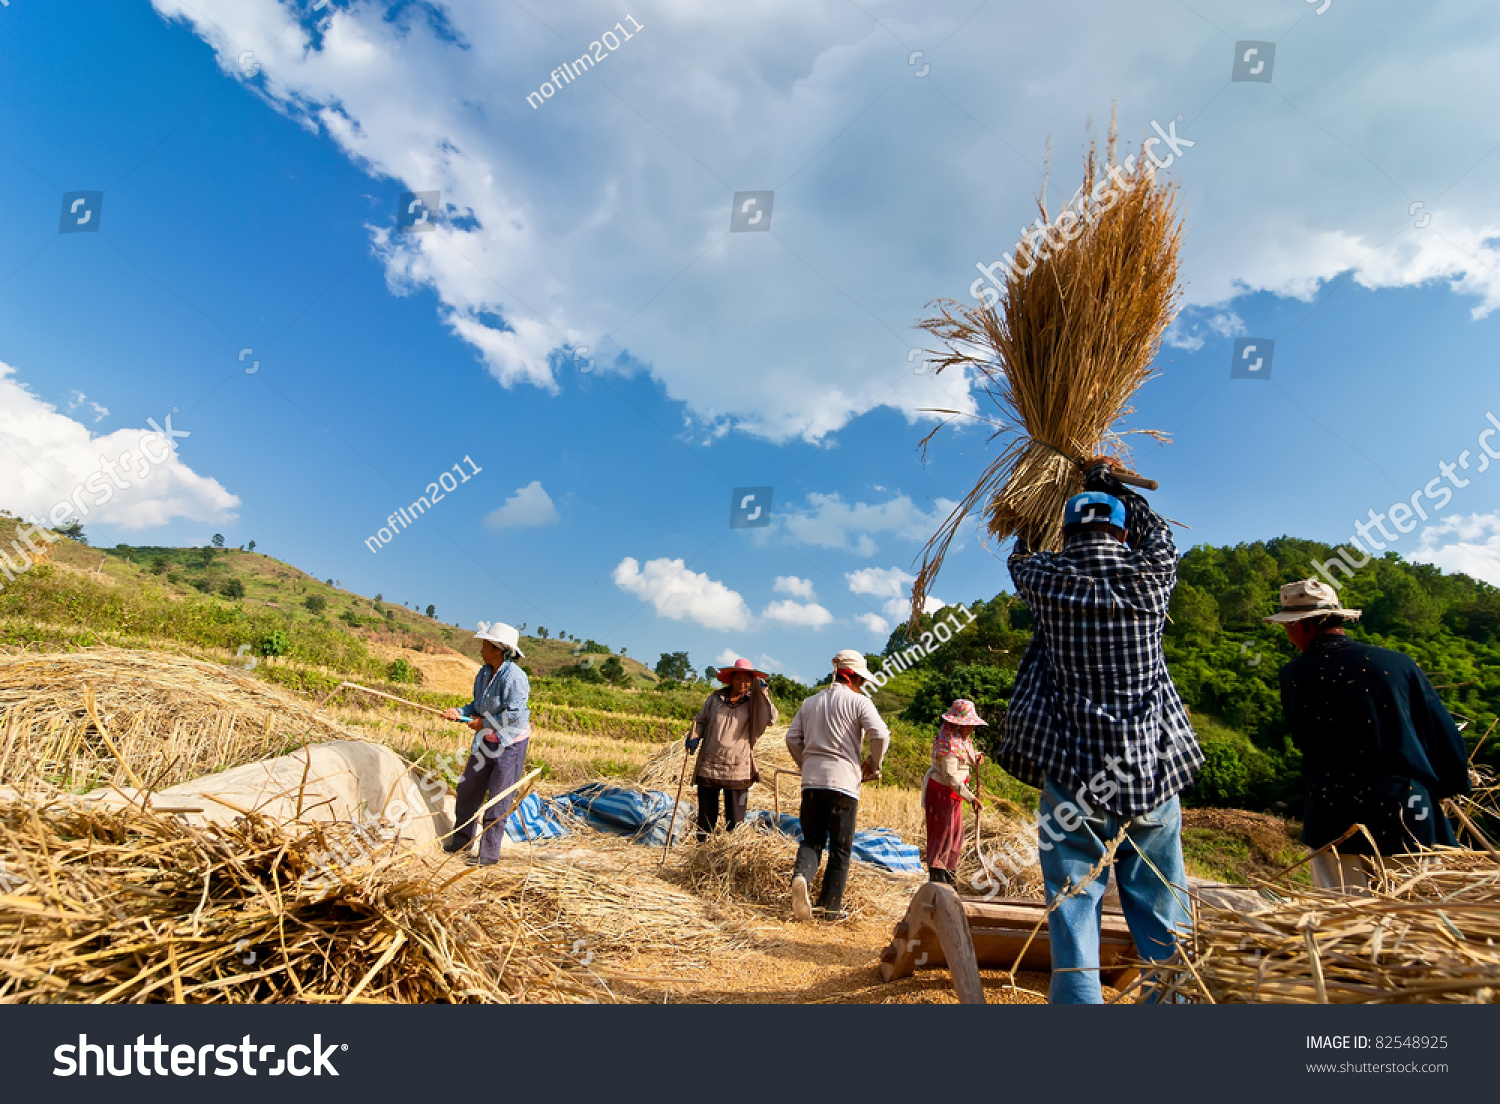 The harvest of a mountain tribe in northern Thailand. #82548925